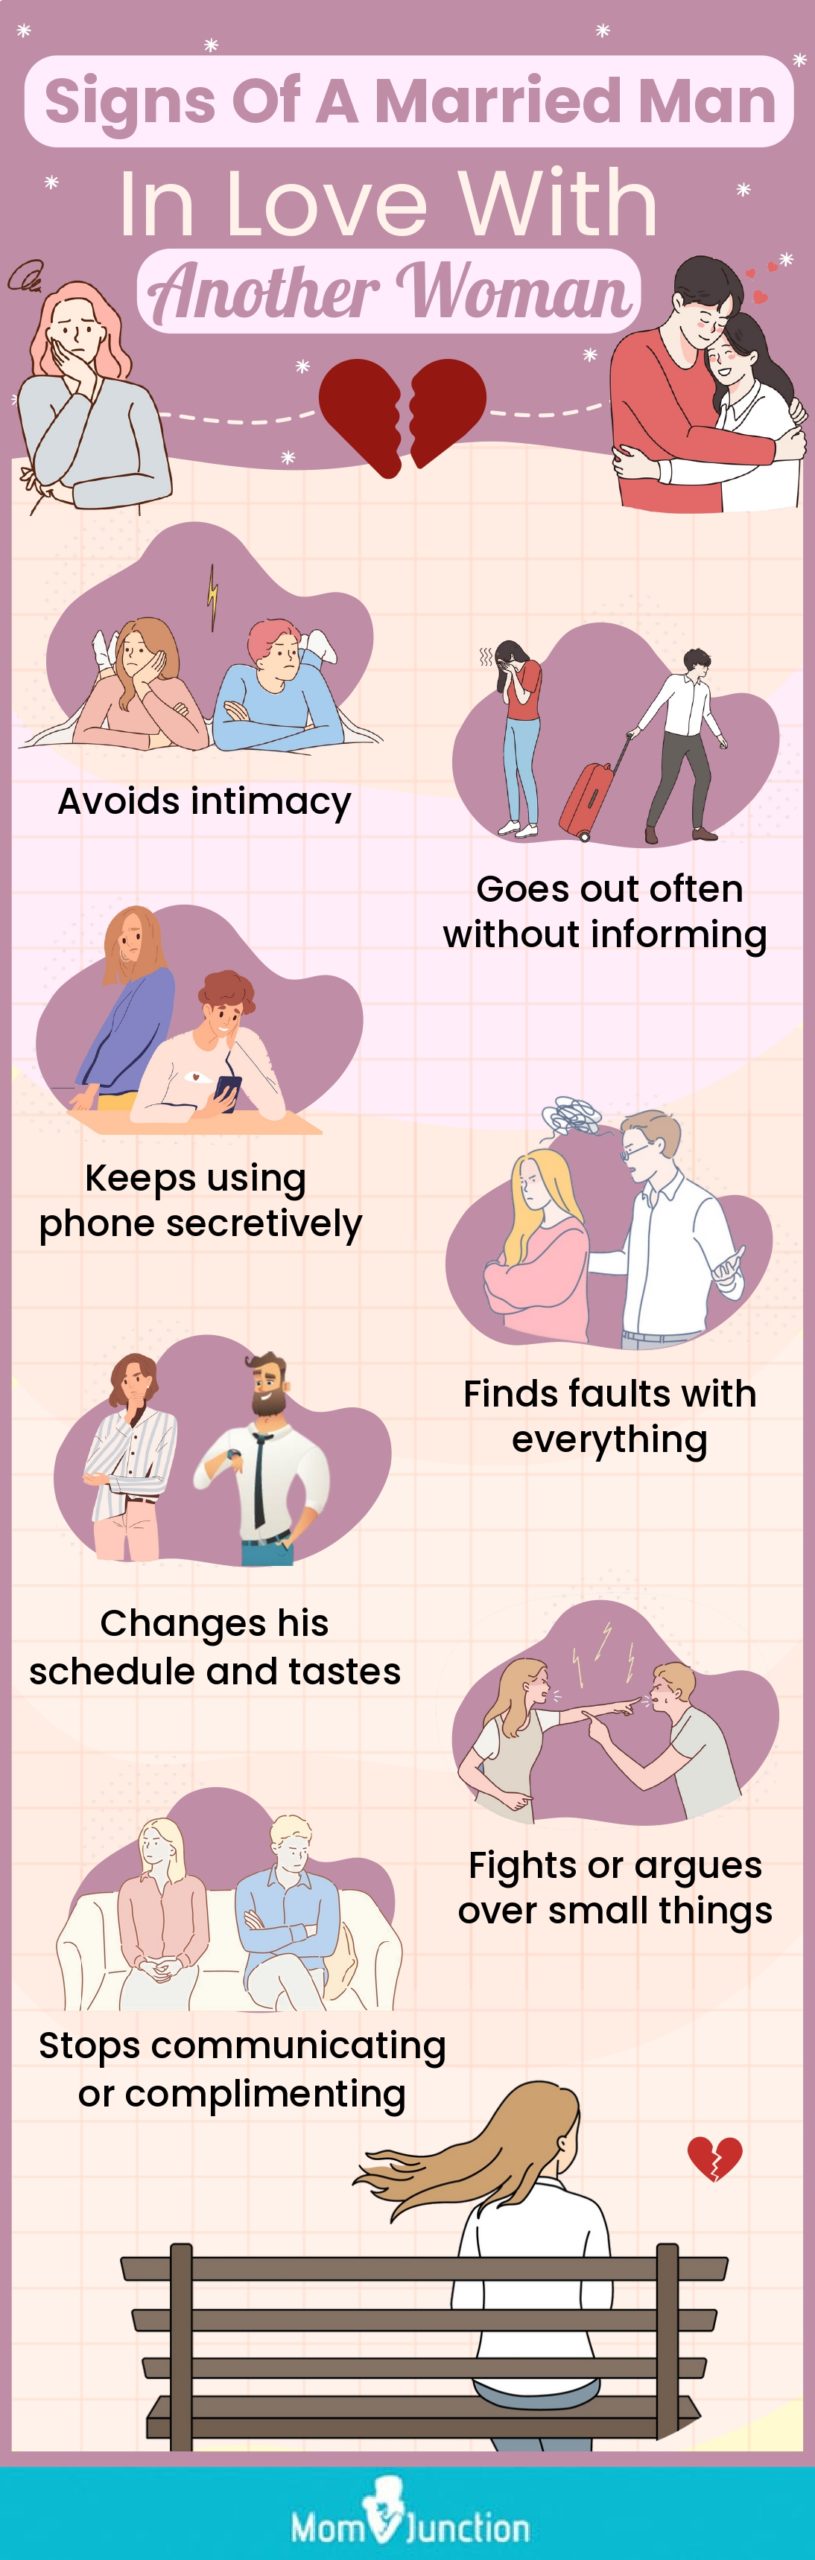 signs of a married man in love with another women [infographic]